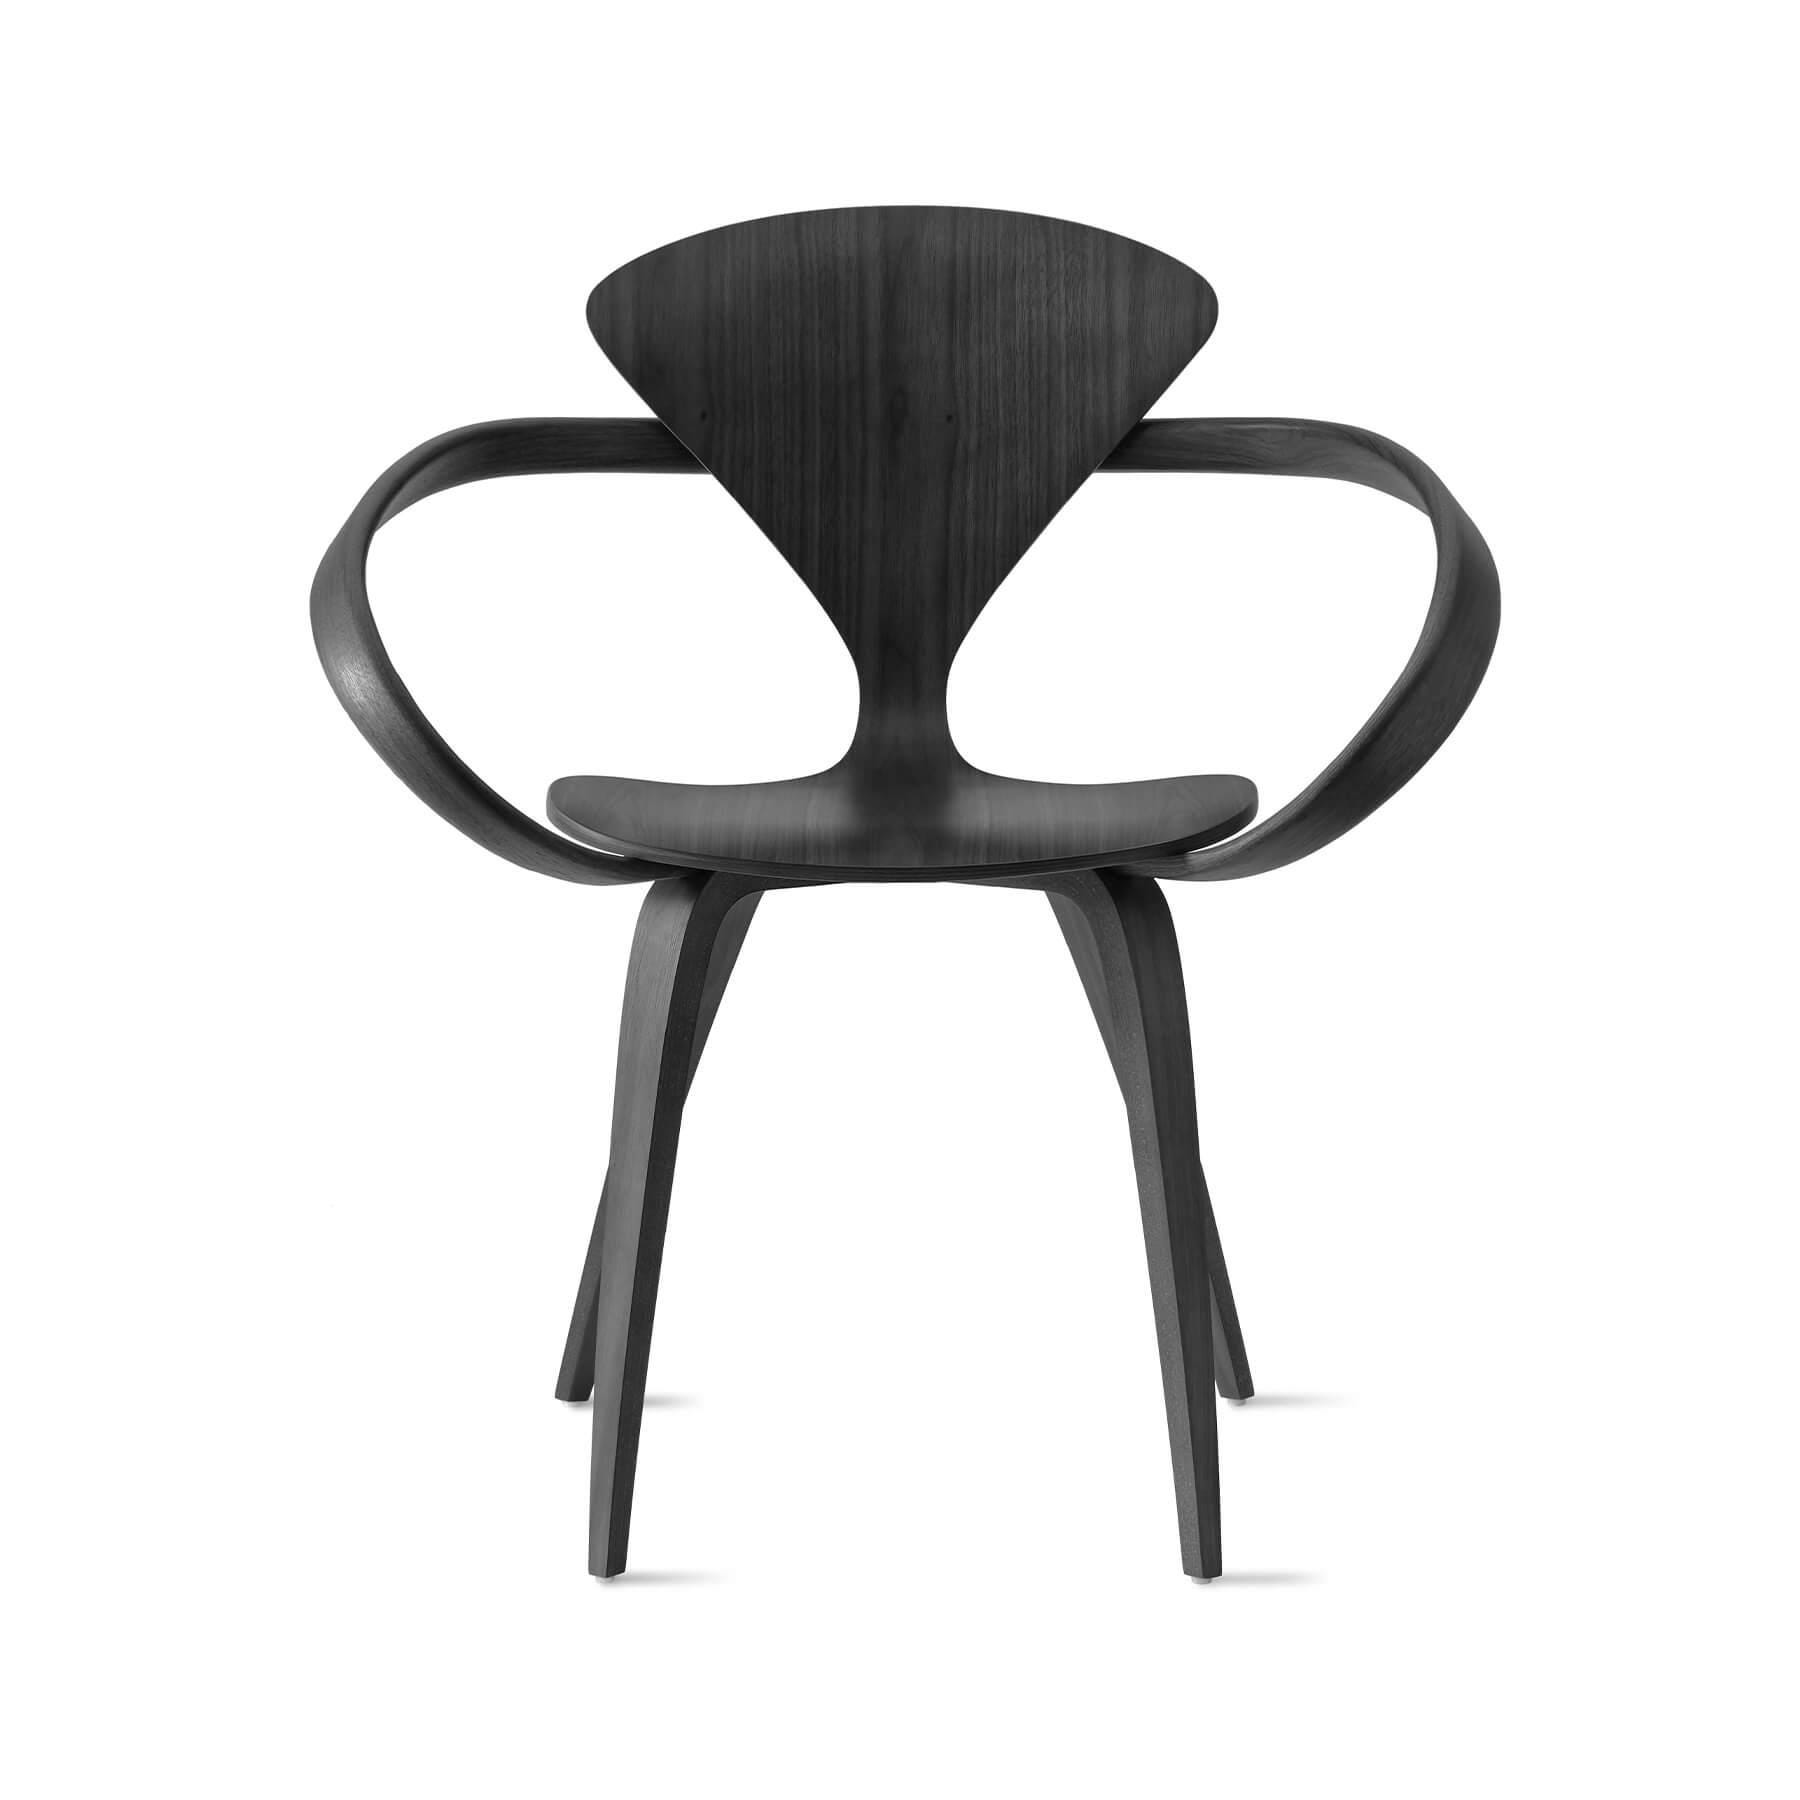 Cherner Armchair Unupholstered Classic Ebony Black Designer Furniture From Holloways Of Ludlow